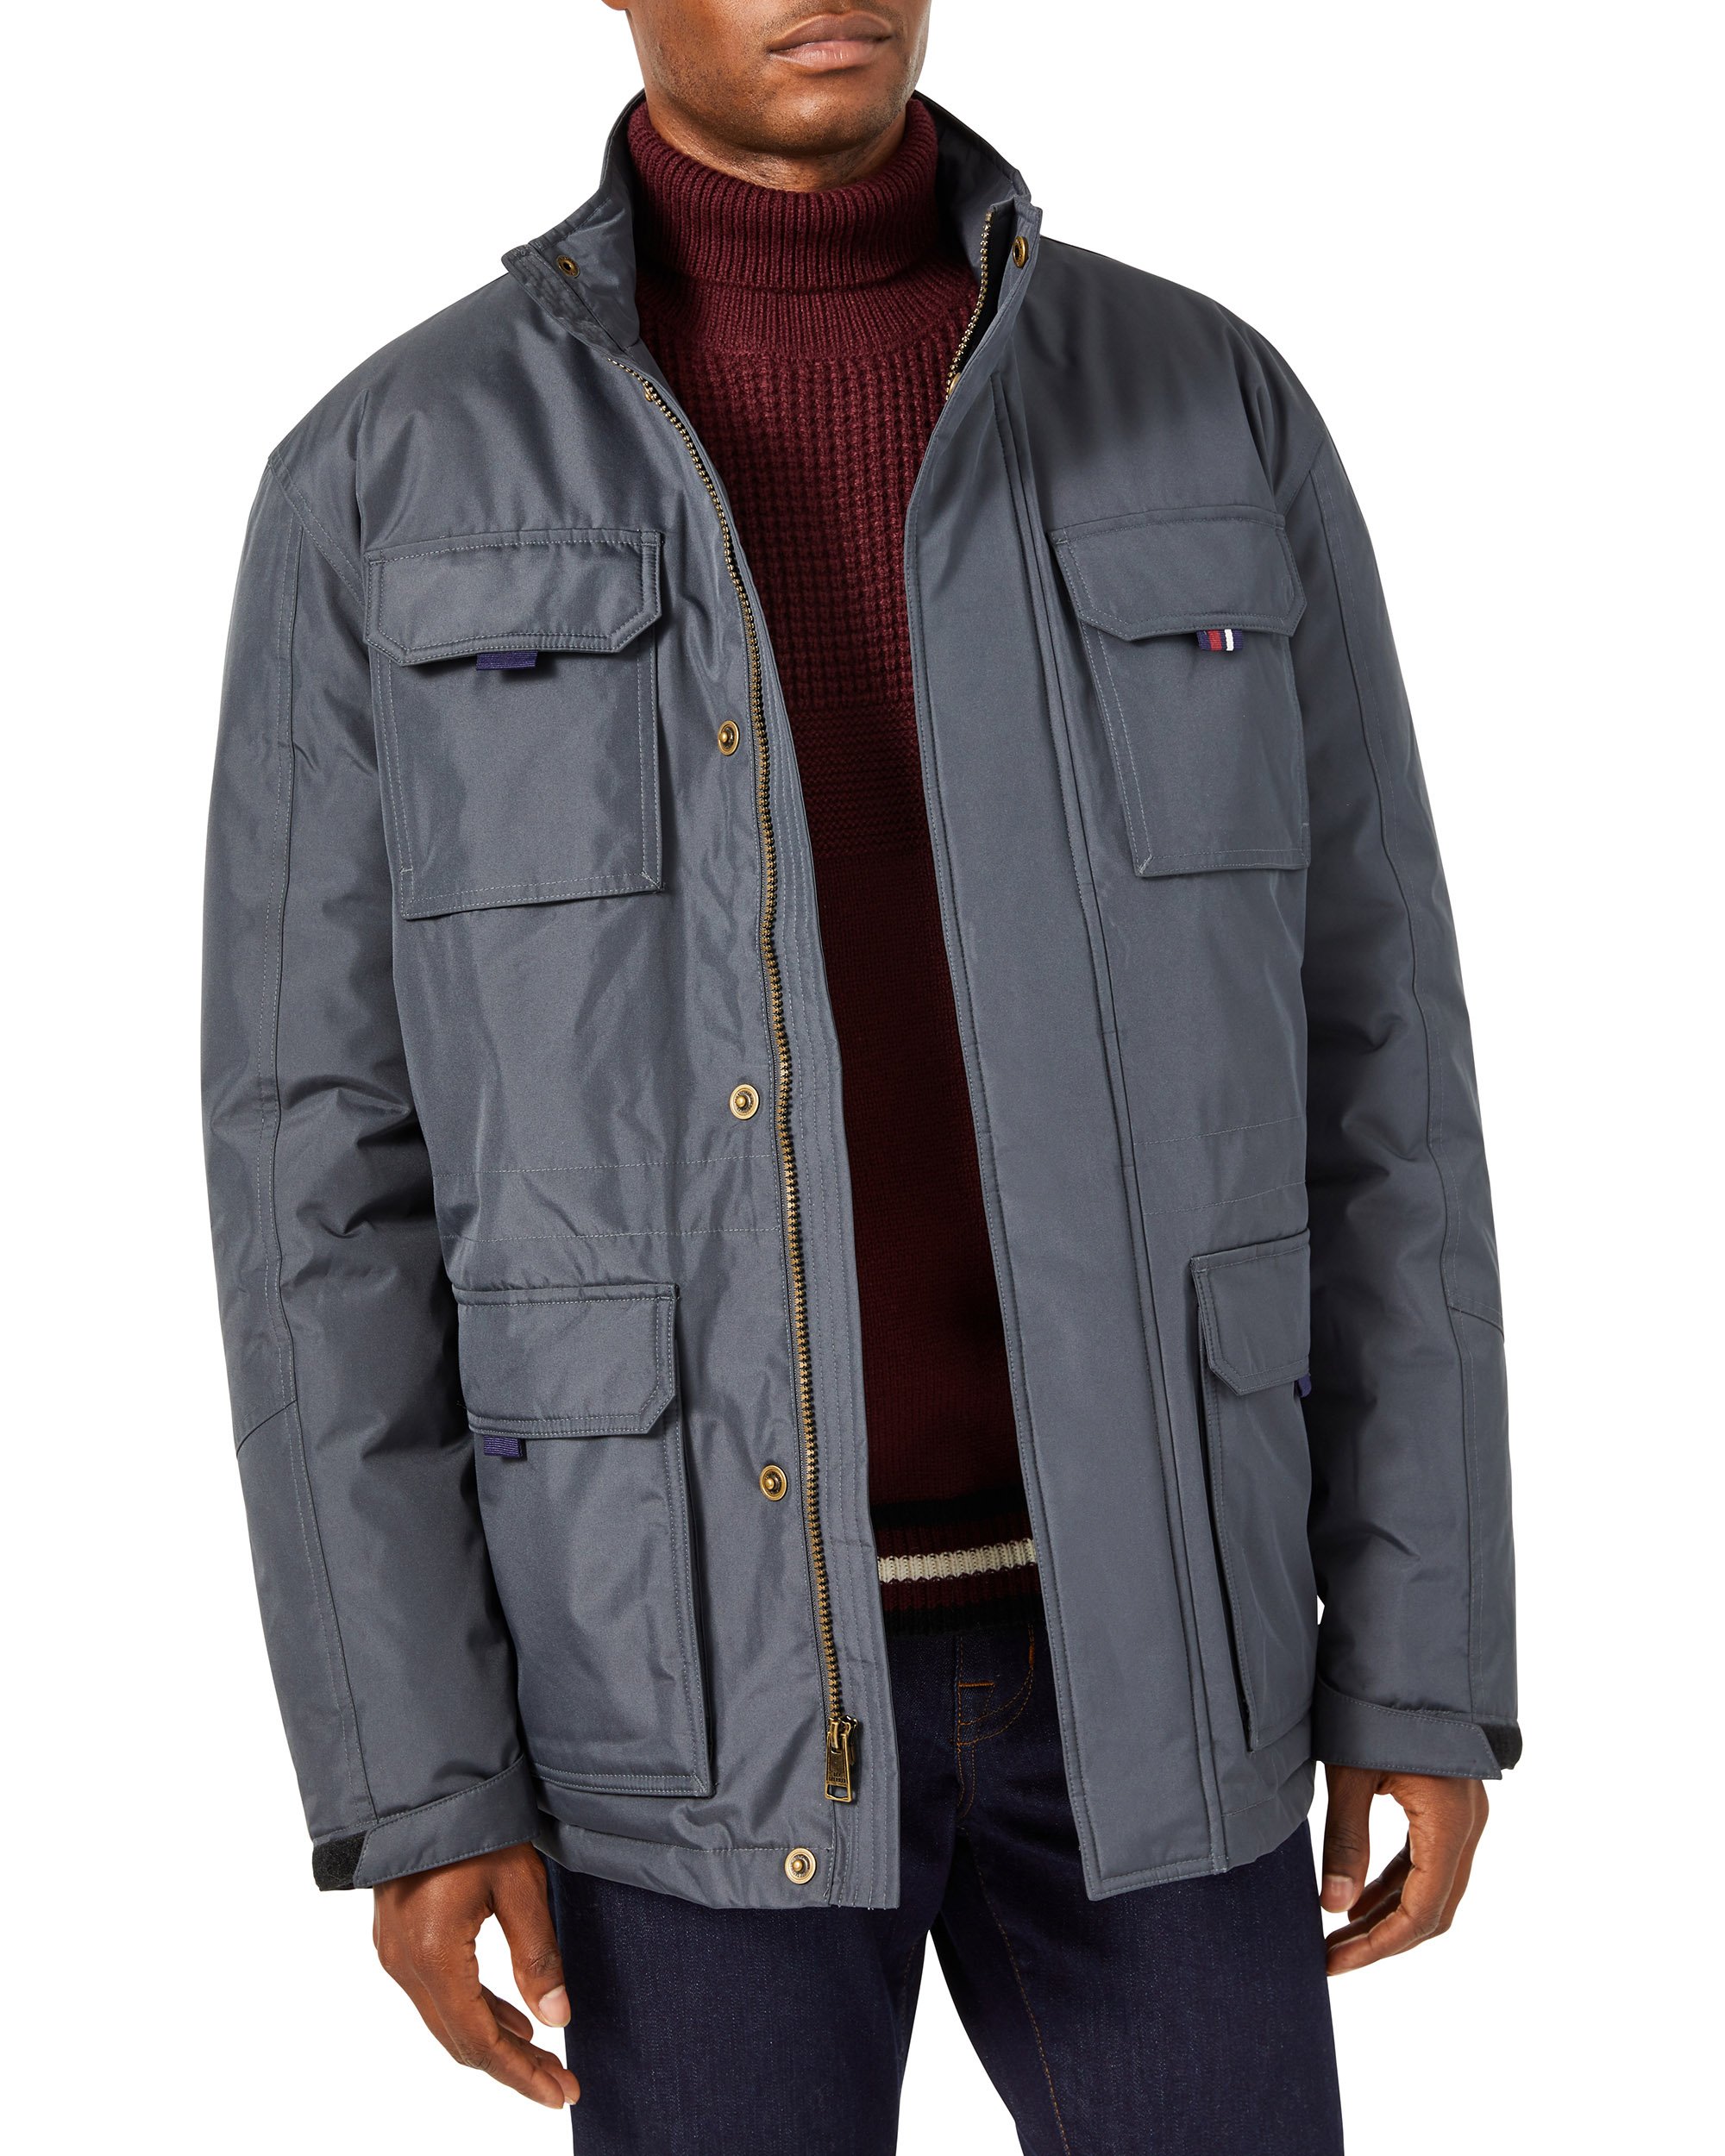 Image of Men''s Utility Parka with Hooded Bib - Carbon